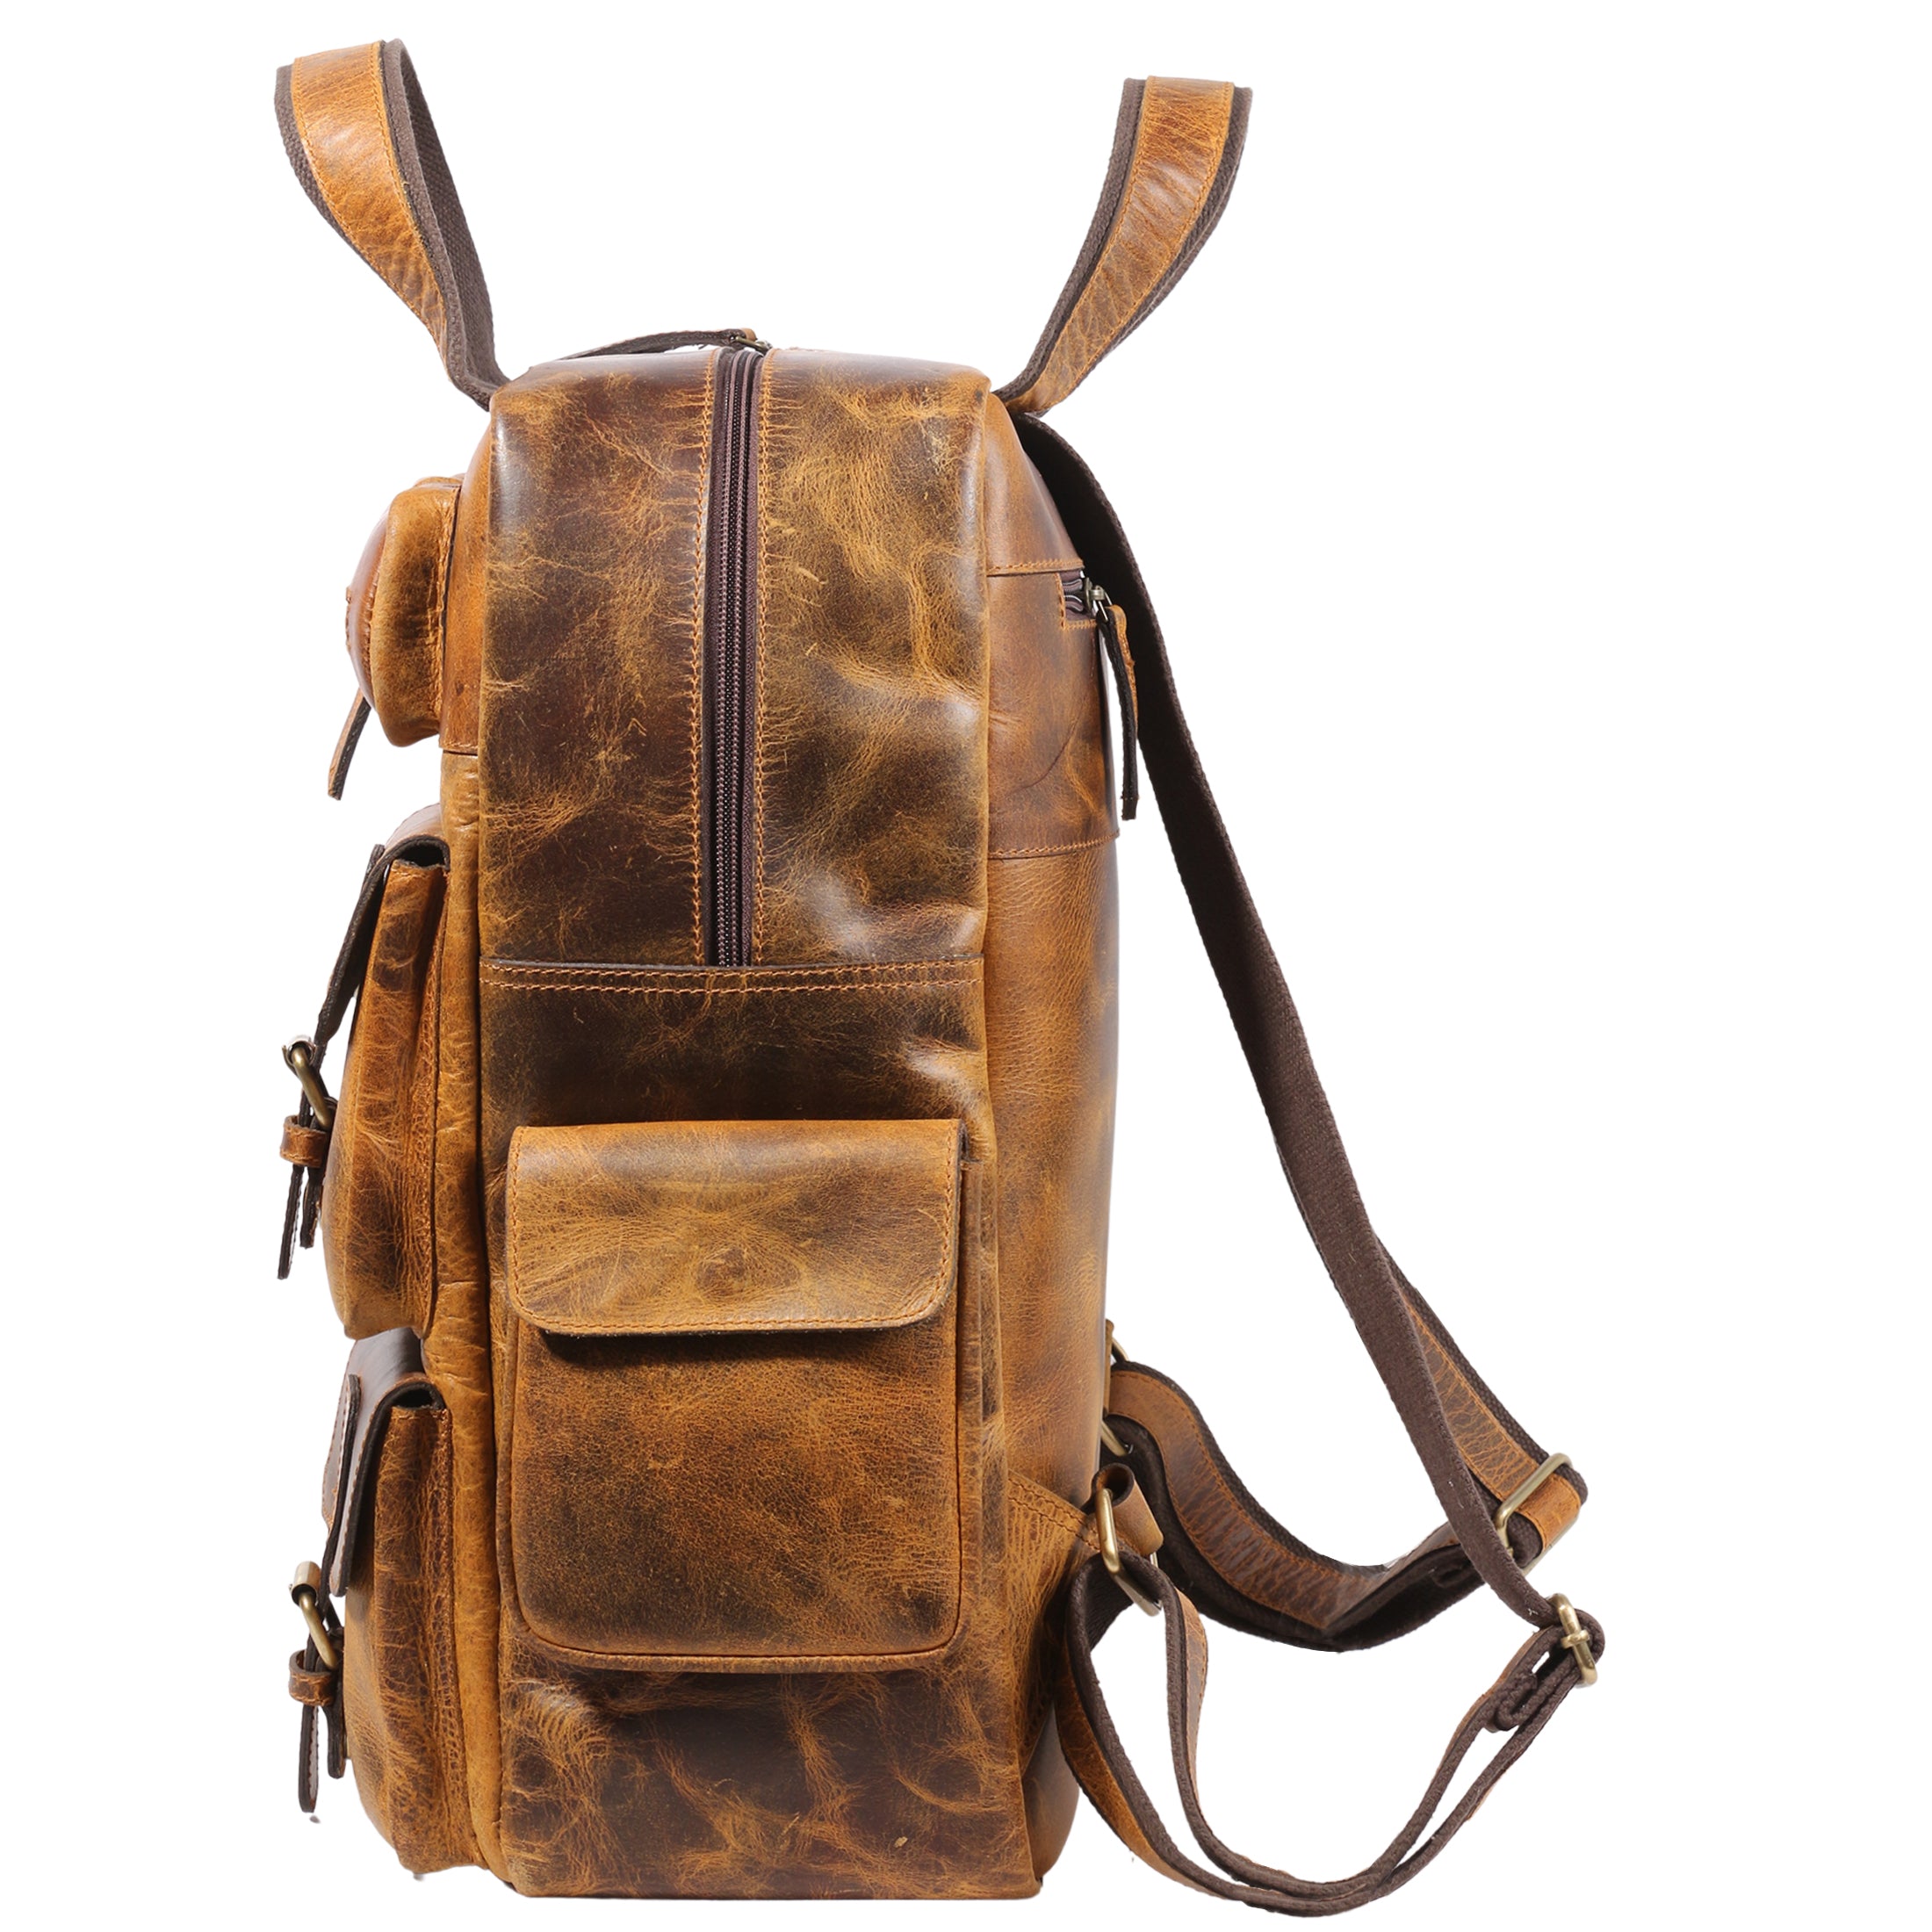 16" Leather Backpack for College Bag for Men & Women - HLRZNT001_1